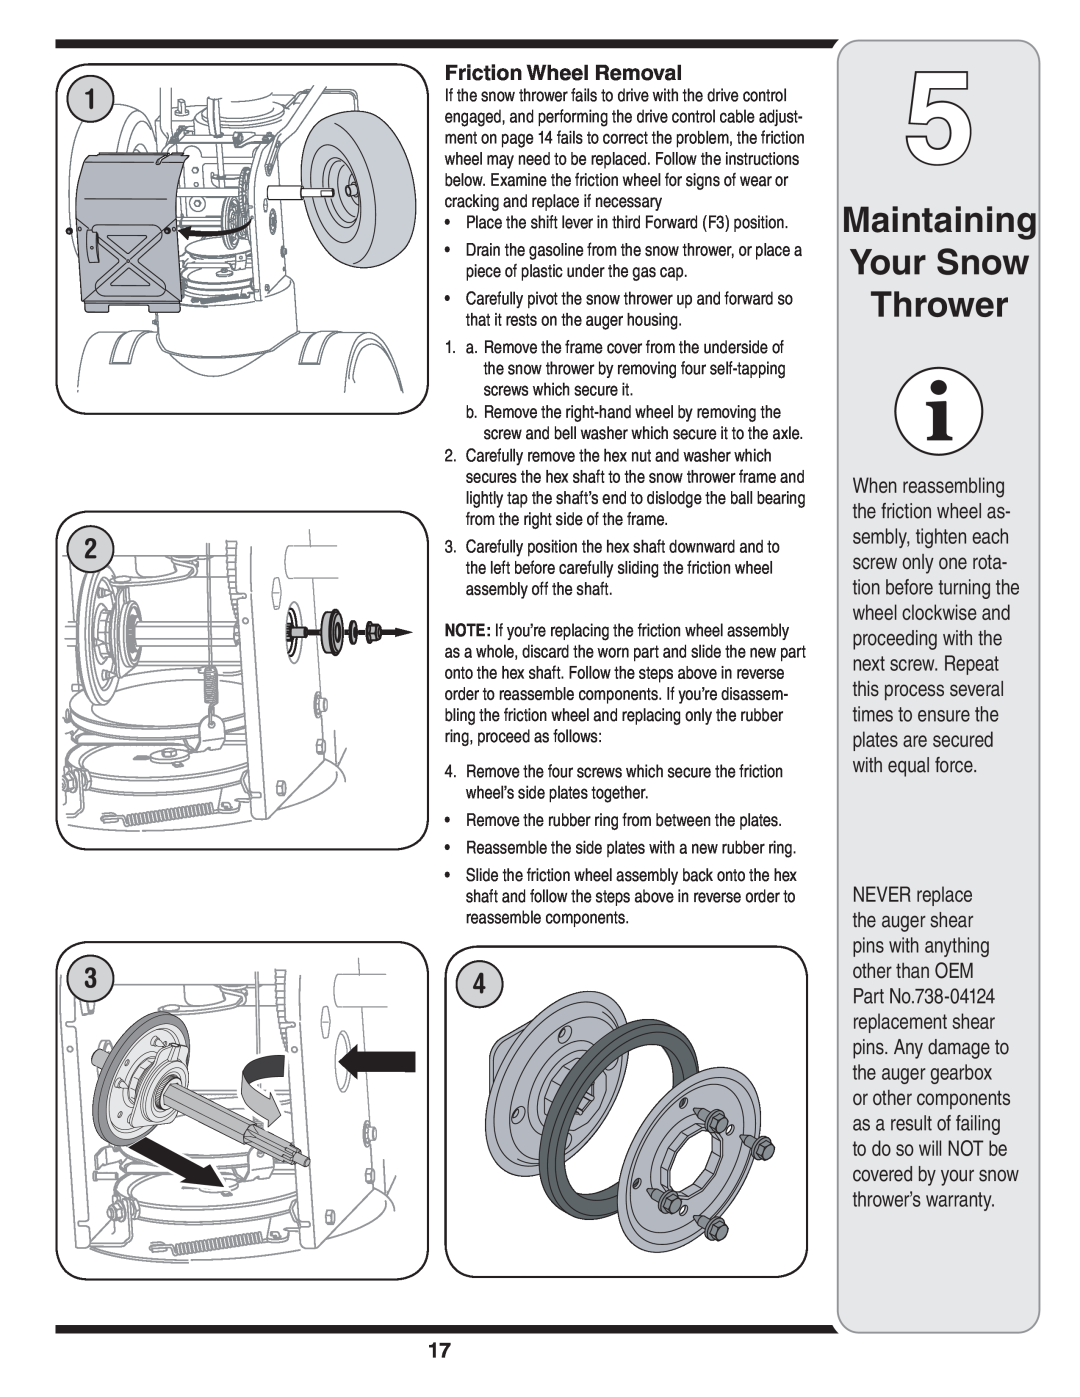 MTD 769-01275C Maintaining Your Snow Thrower, Friction Wheel Removal, Reassemble the side plates with a new rubber ring 